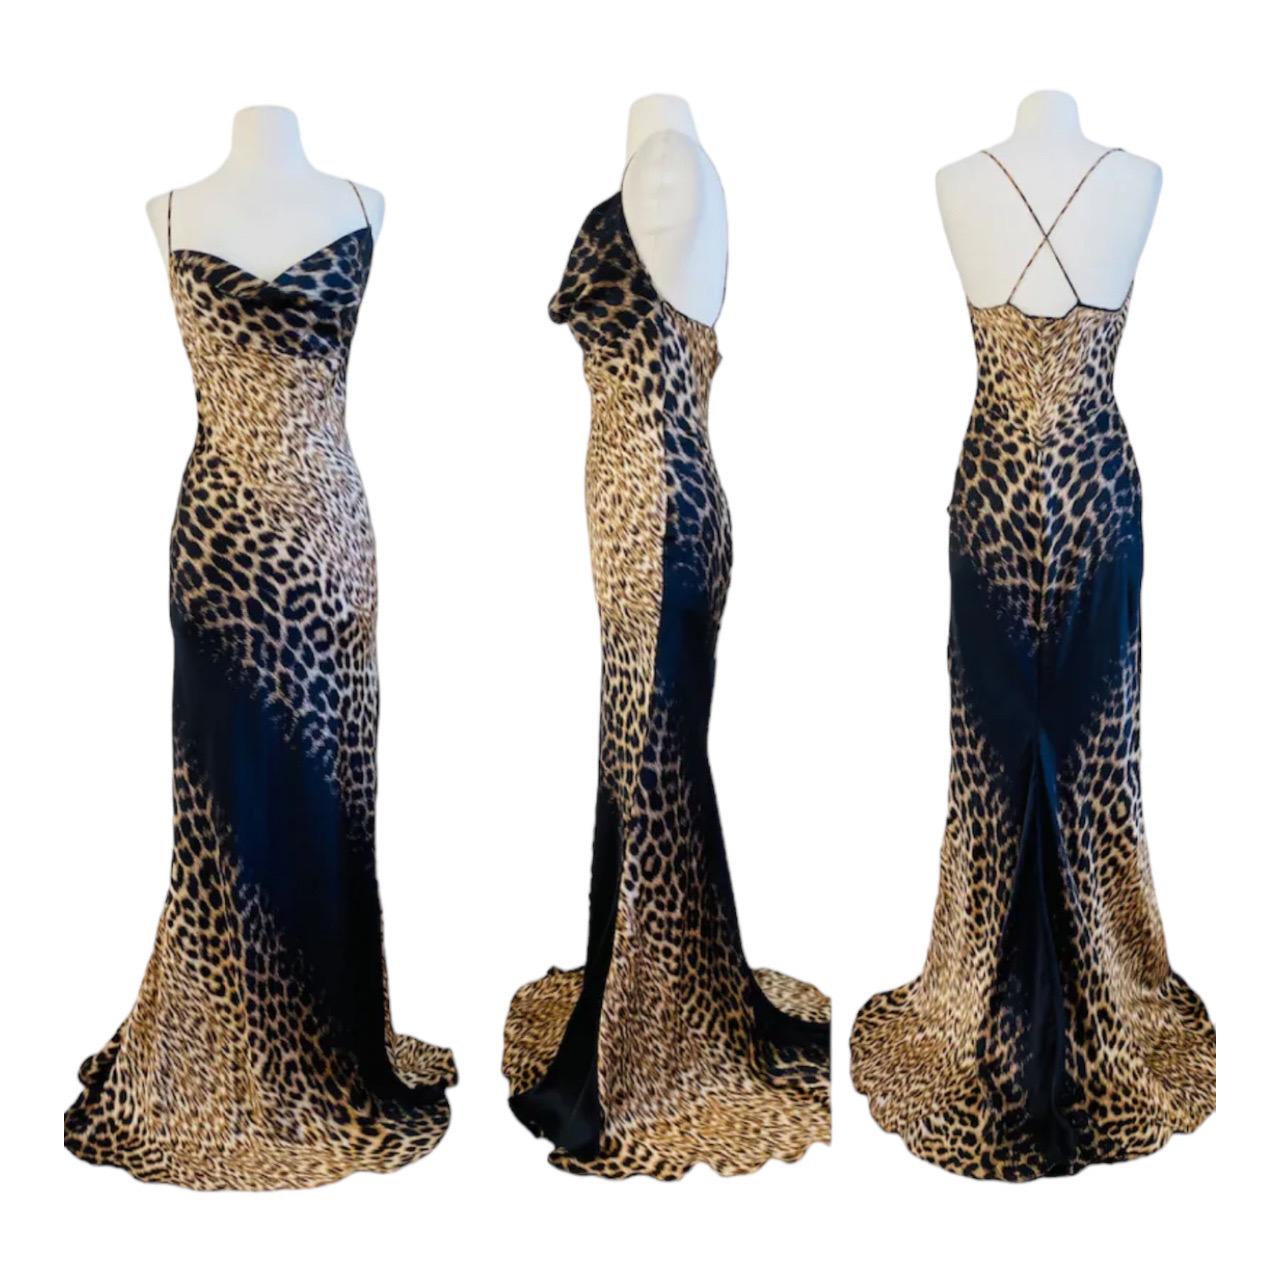 2000 Roberto Cavalli Silk Dress Gown
Similar style seen on Cindy Crawford
Incredible leopard print with contrasting black asymmetrical stripes silk fabric
Lightly draped neckline
Thin shoulder straps that cross at the upper back
Bias cut maxi